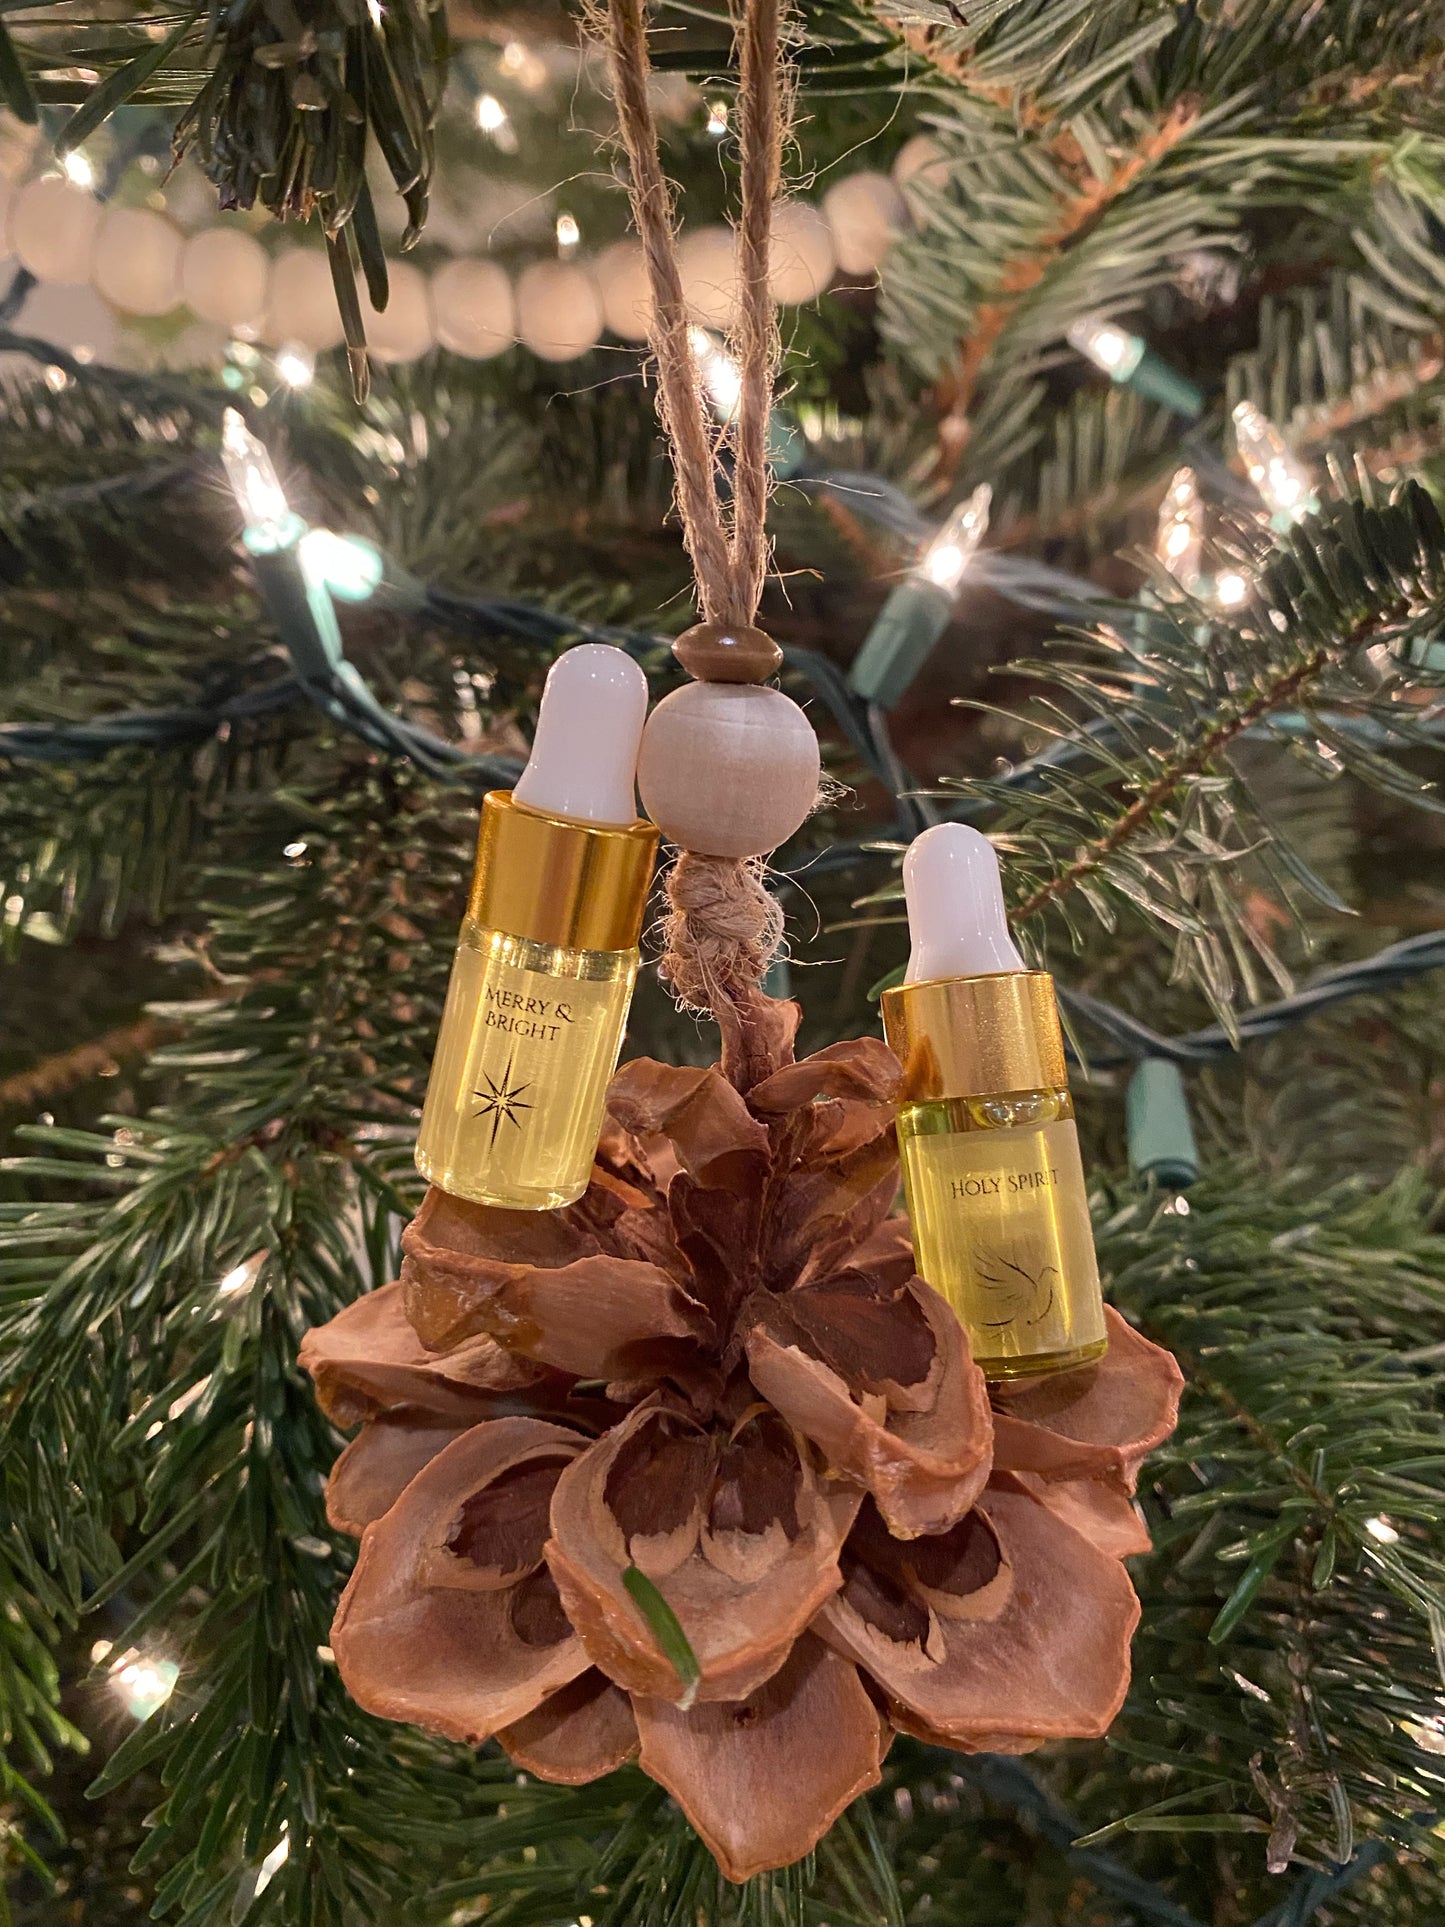 Merry & Bright Holiday Anointing Oil